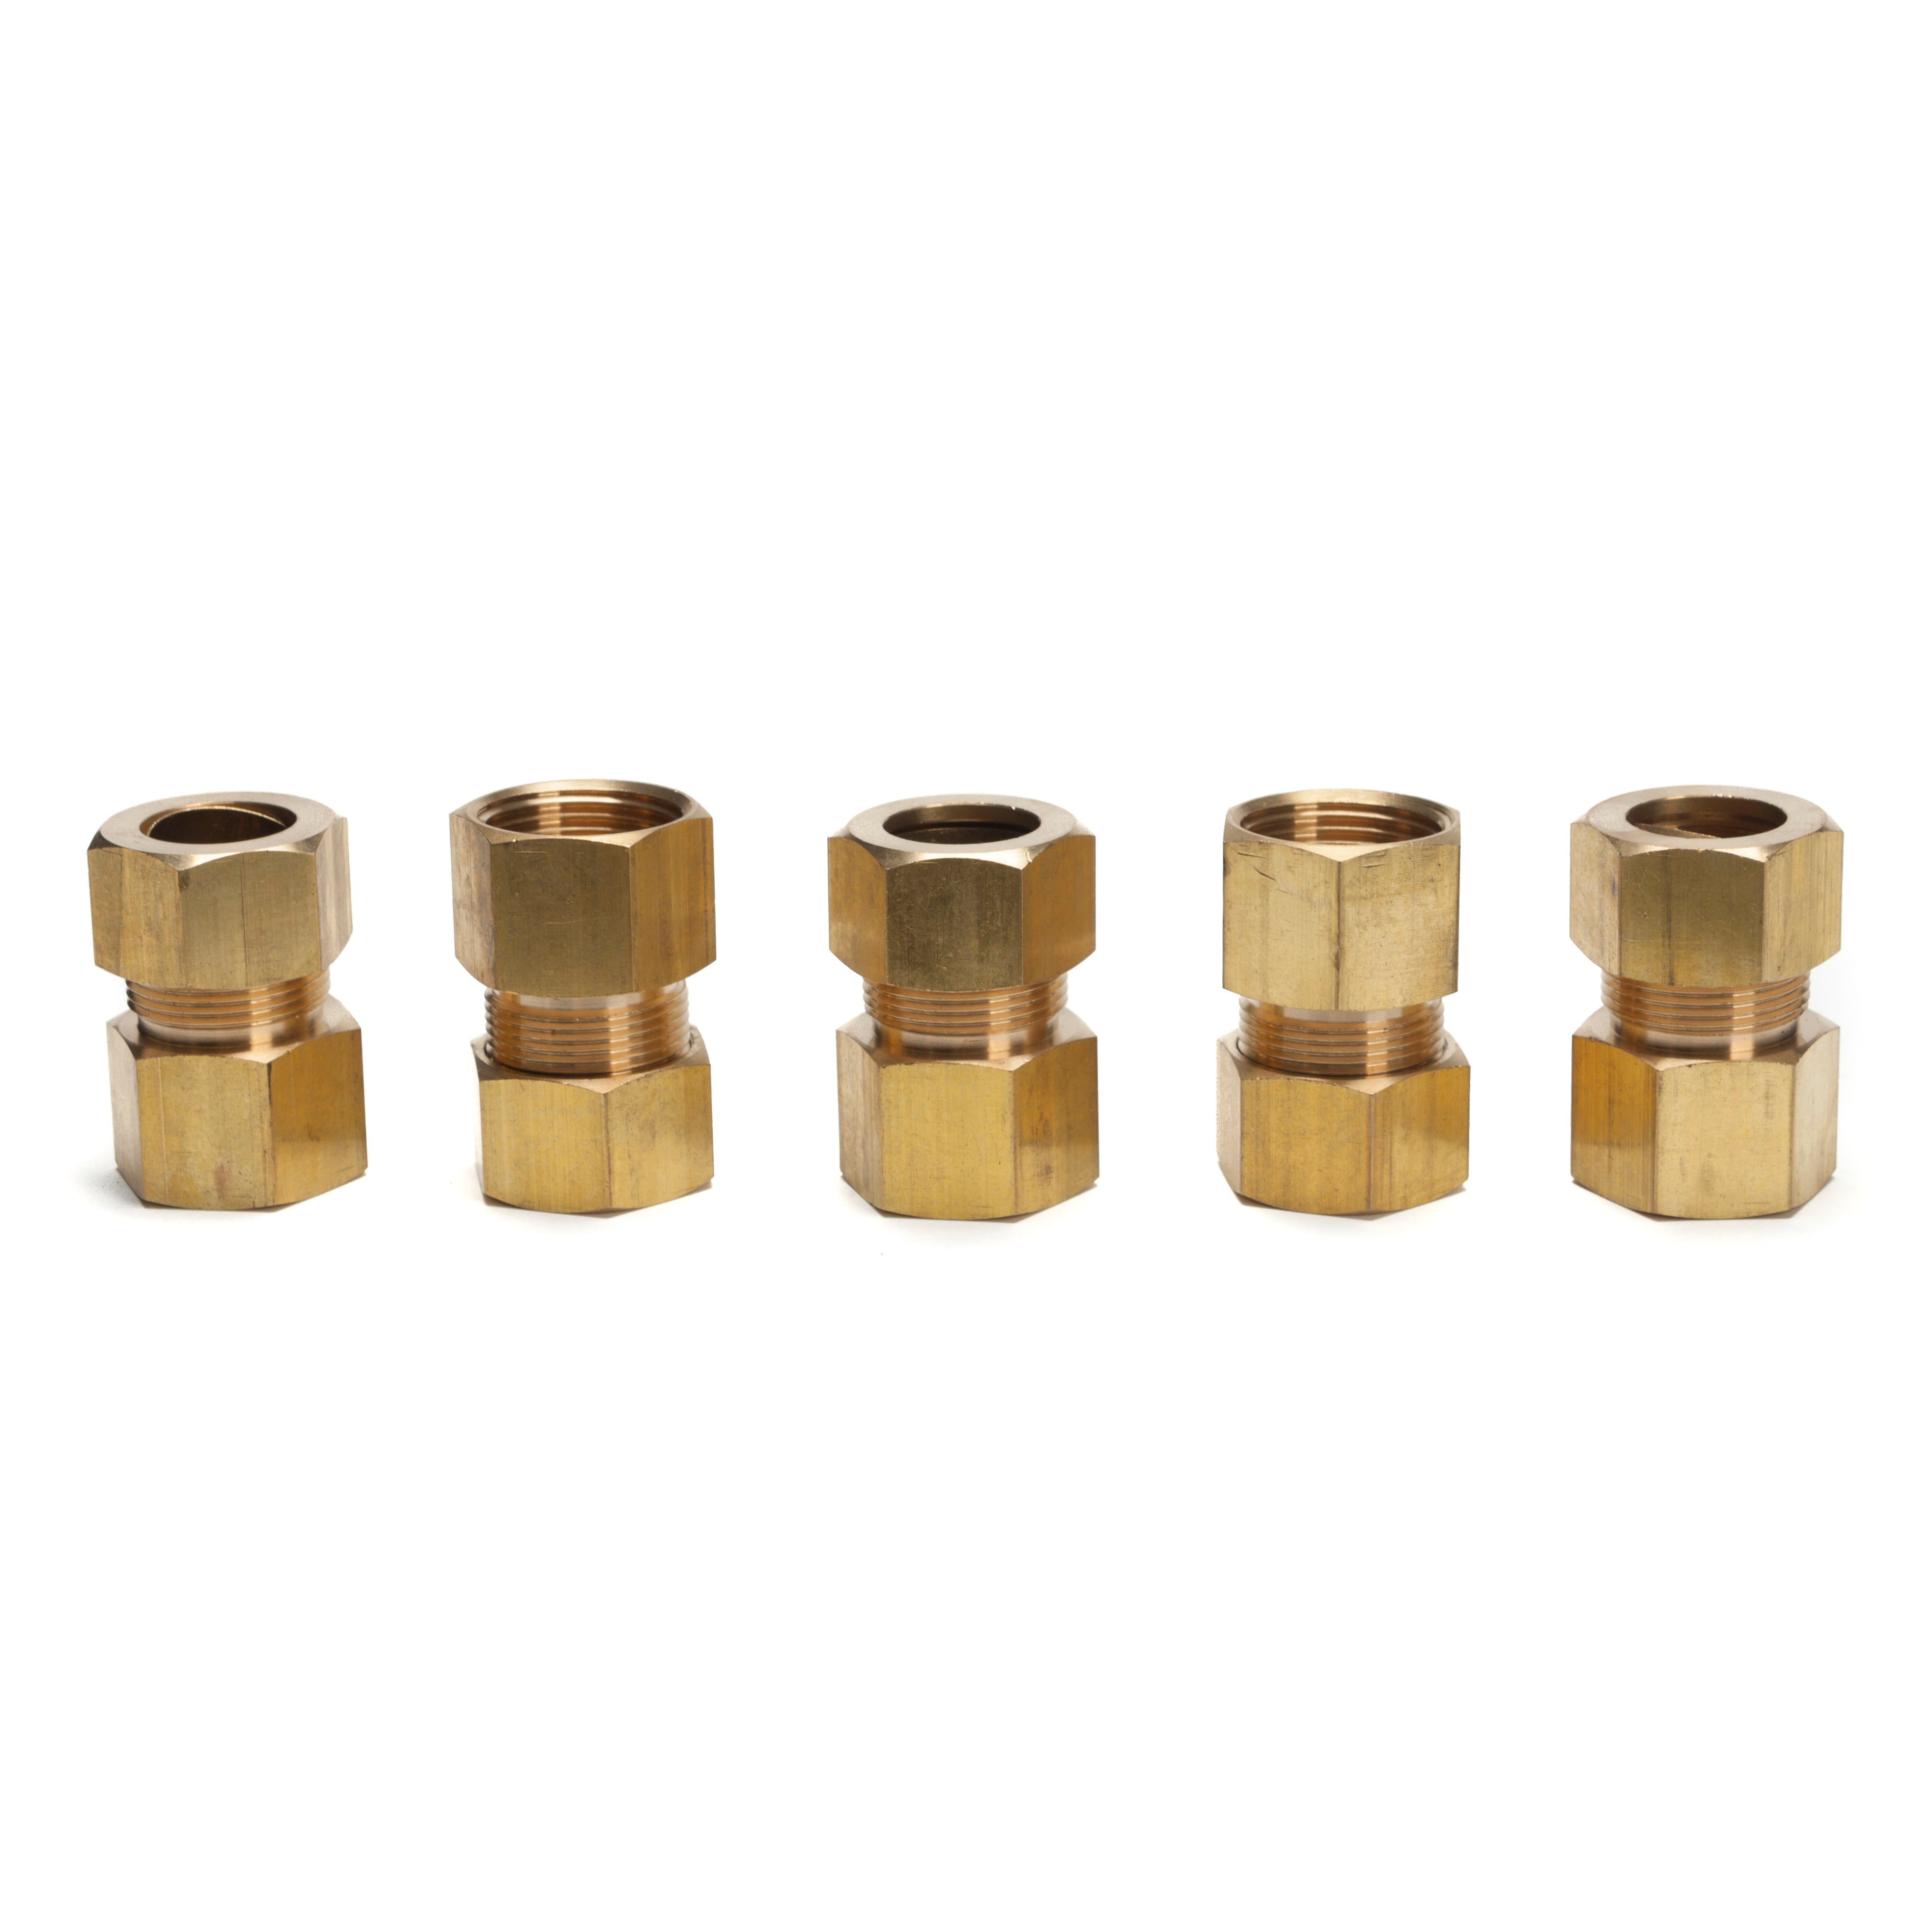 LTWFITTING Lead Free 3/8-Inch OD Compression Union, Brass Compression  Fitting (Pack of 5)